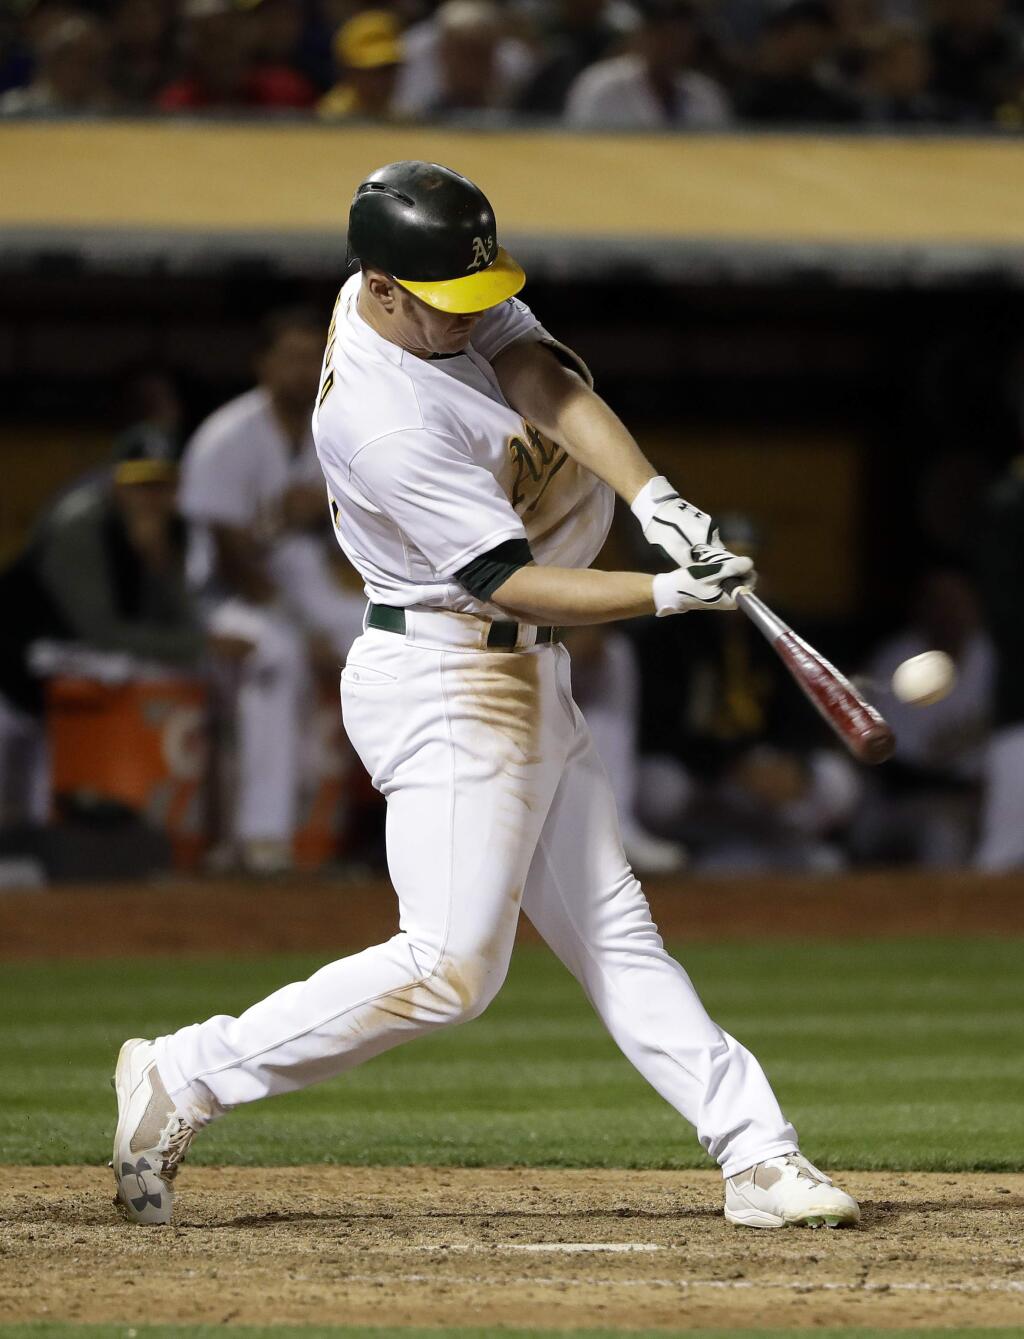 The Oakland Athletics' Mark Canha hits a solo walk-off home run during the 10th inning against the Boston Red Sox on Friday, May 19, 2017, in Oakland. (AP Photo/Marcio Jose Sanchez)